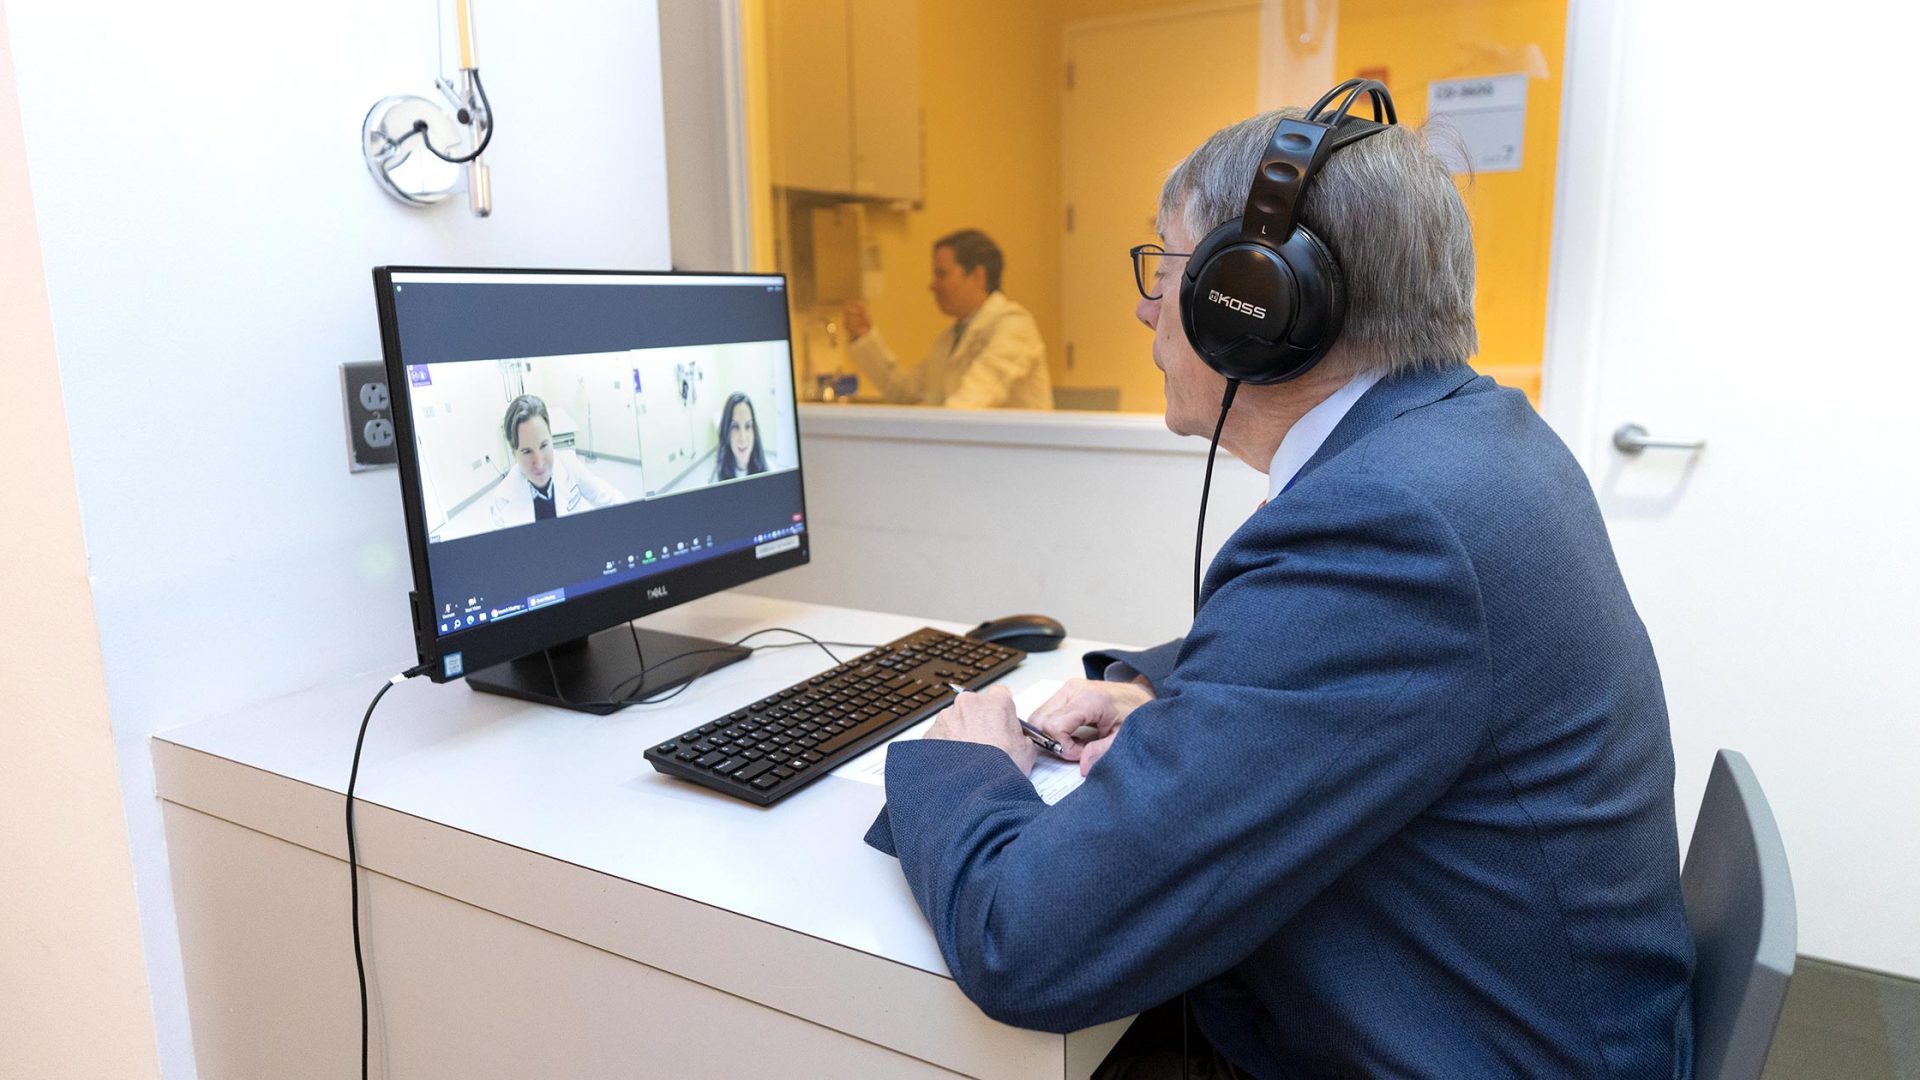 Dr. Neil Busis sits at a computer watching a mock teleneurology appointment as a doctor interacts with a standardized patient